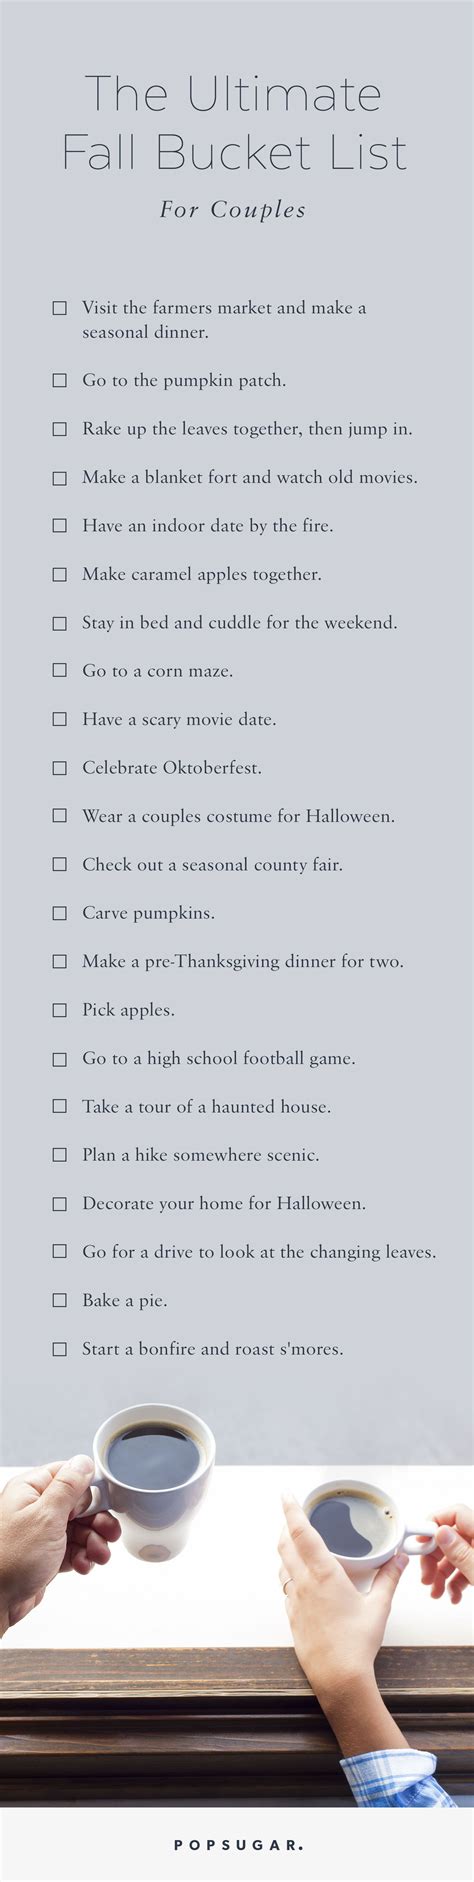 The Ultimate Fall Couples Bucket List | Fall bucket list, Couple bucket list, Couples bucket